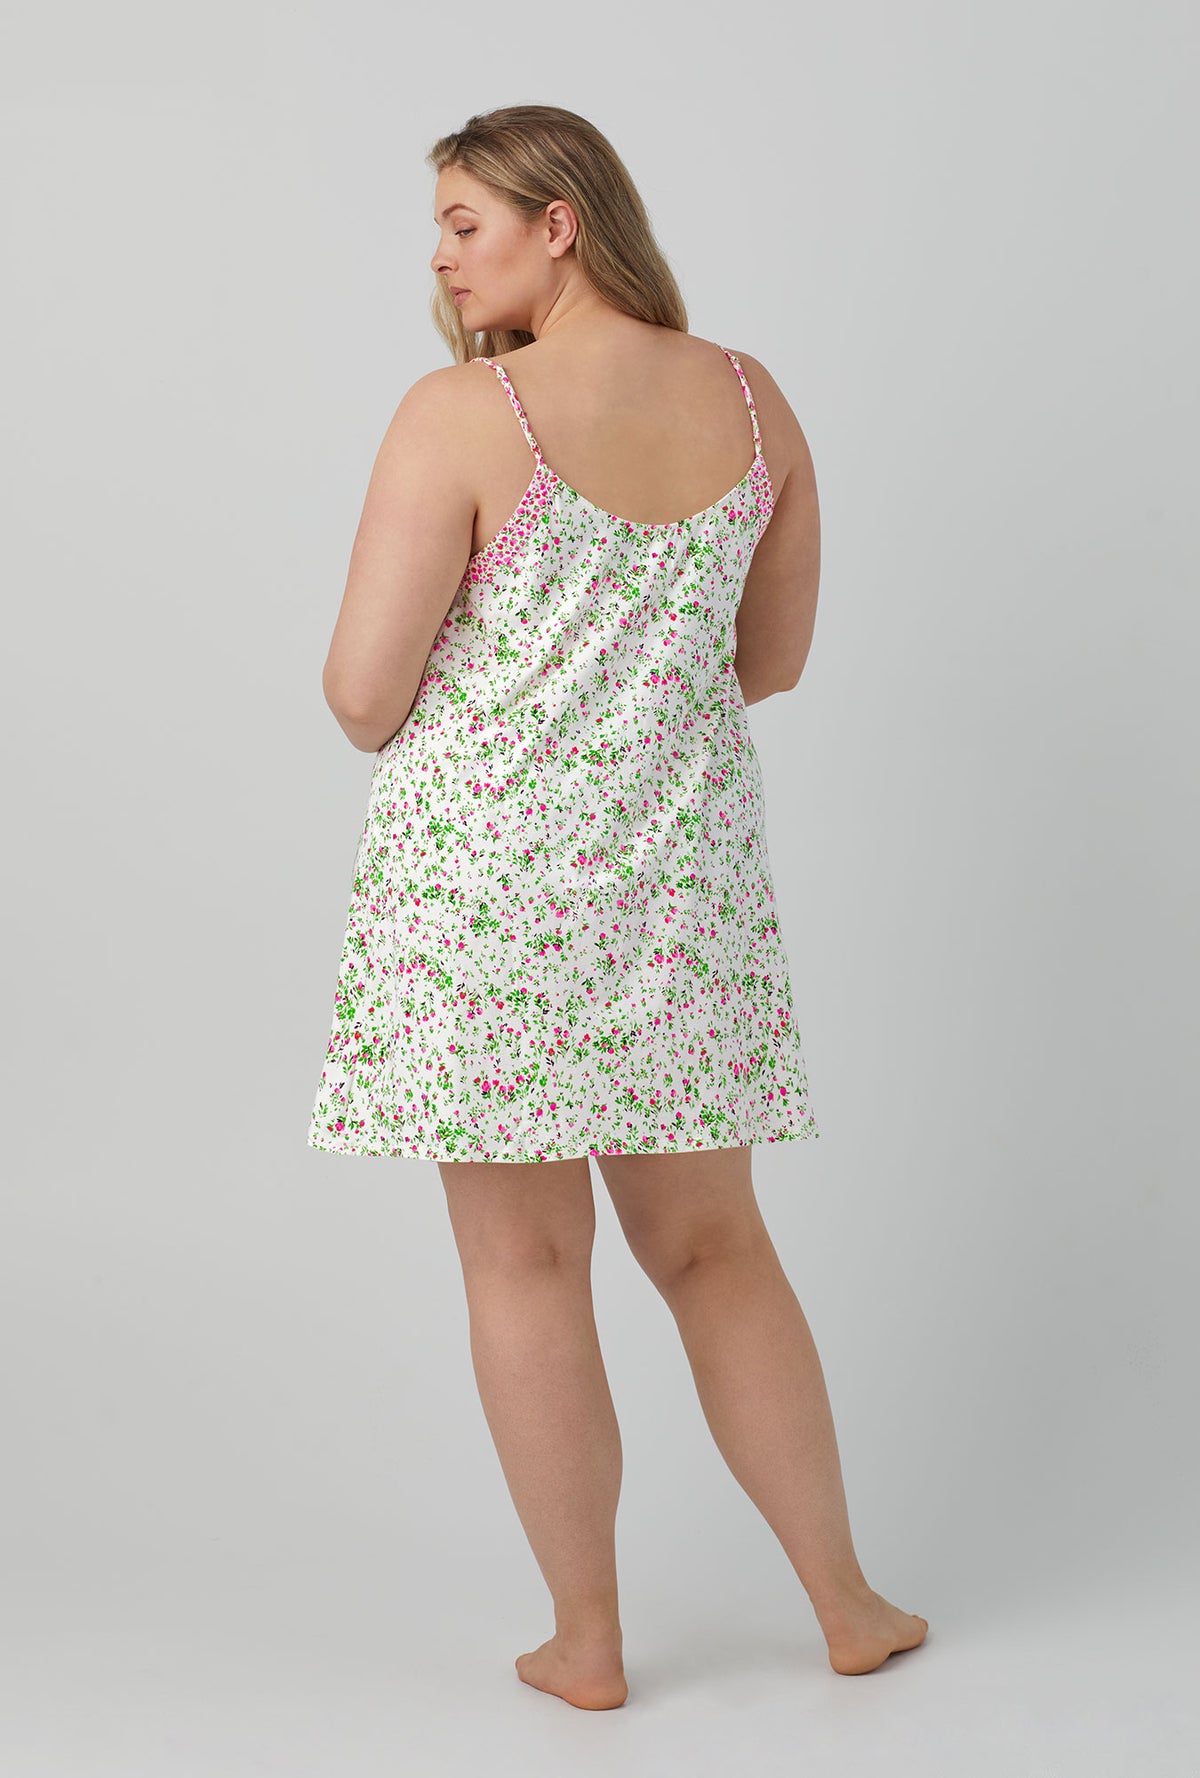 A lady wearing white Stretch Jersey Chemise with Nellie print